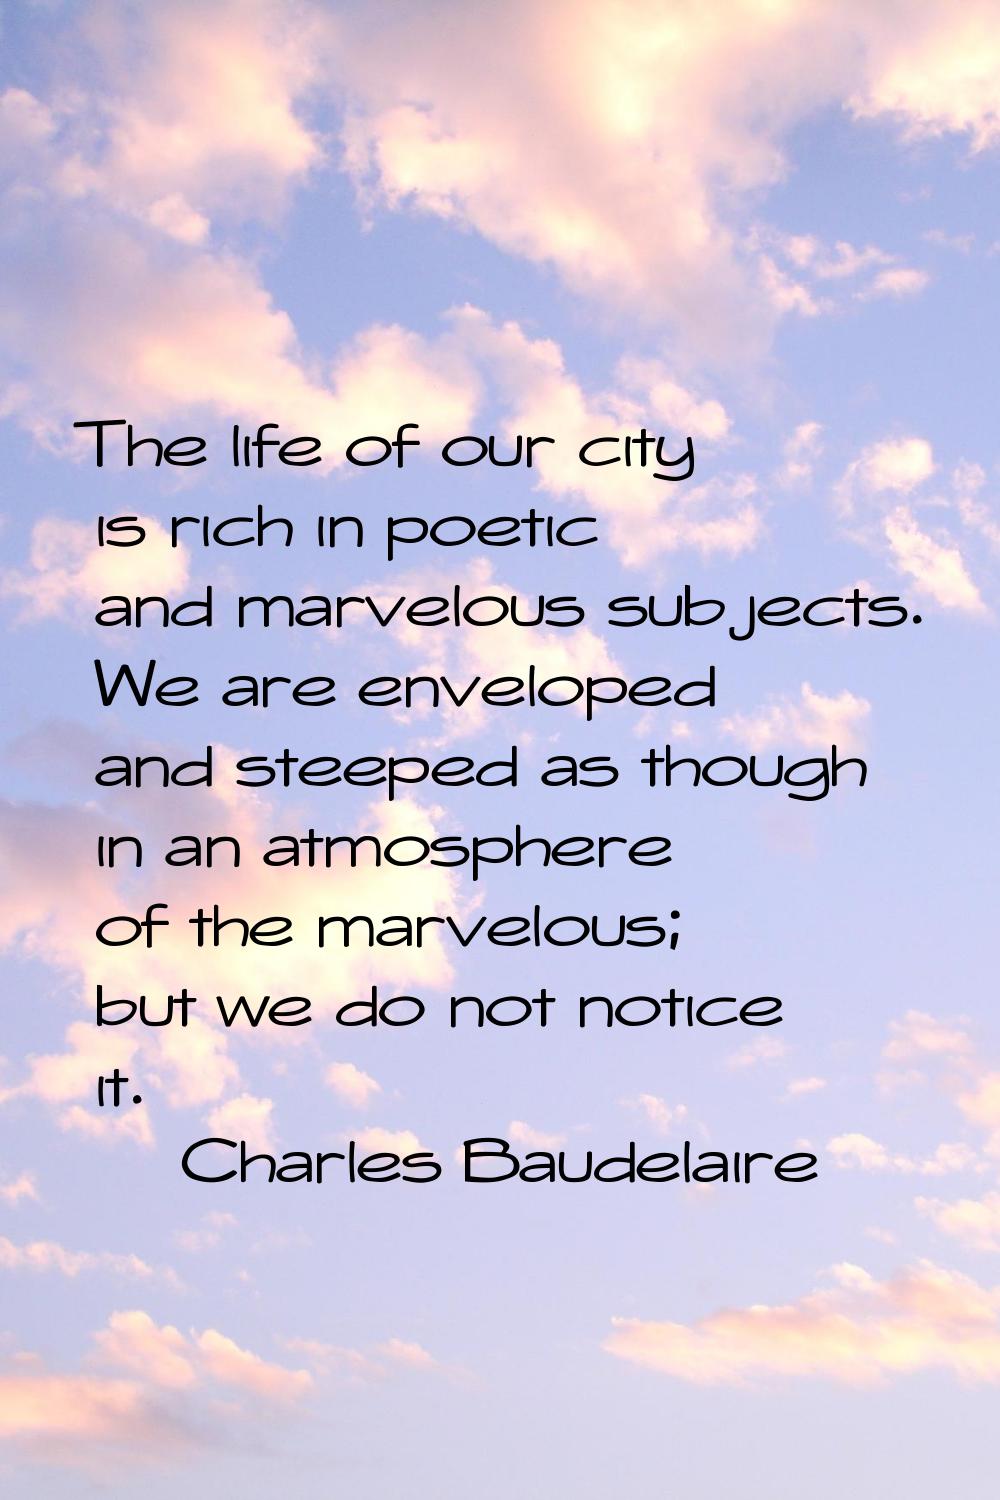 The life of our city is rich in poetic and marvelous subjects. We are enveloped and steeped as thou